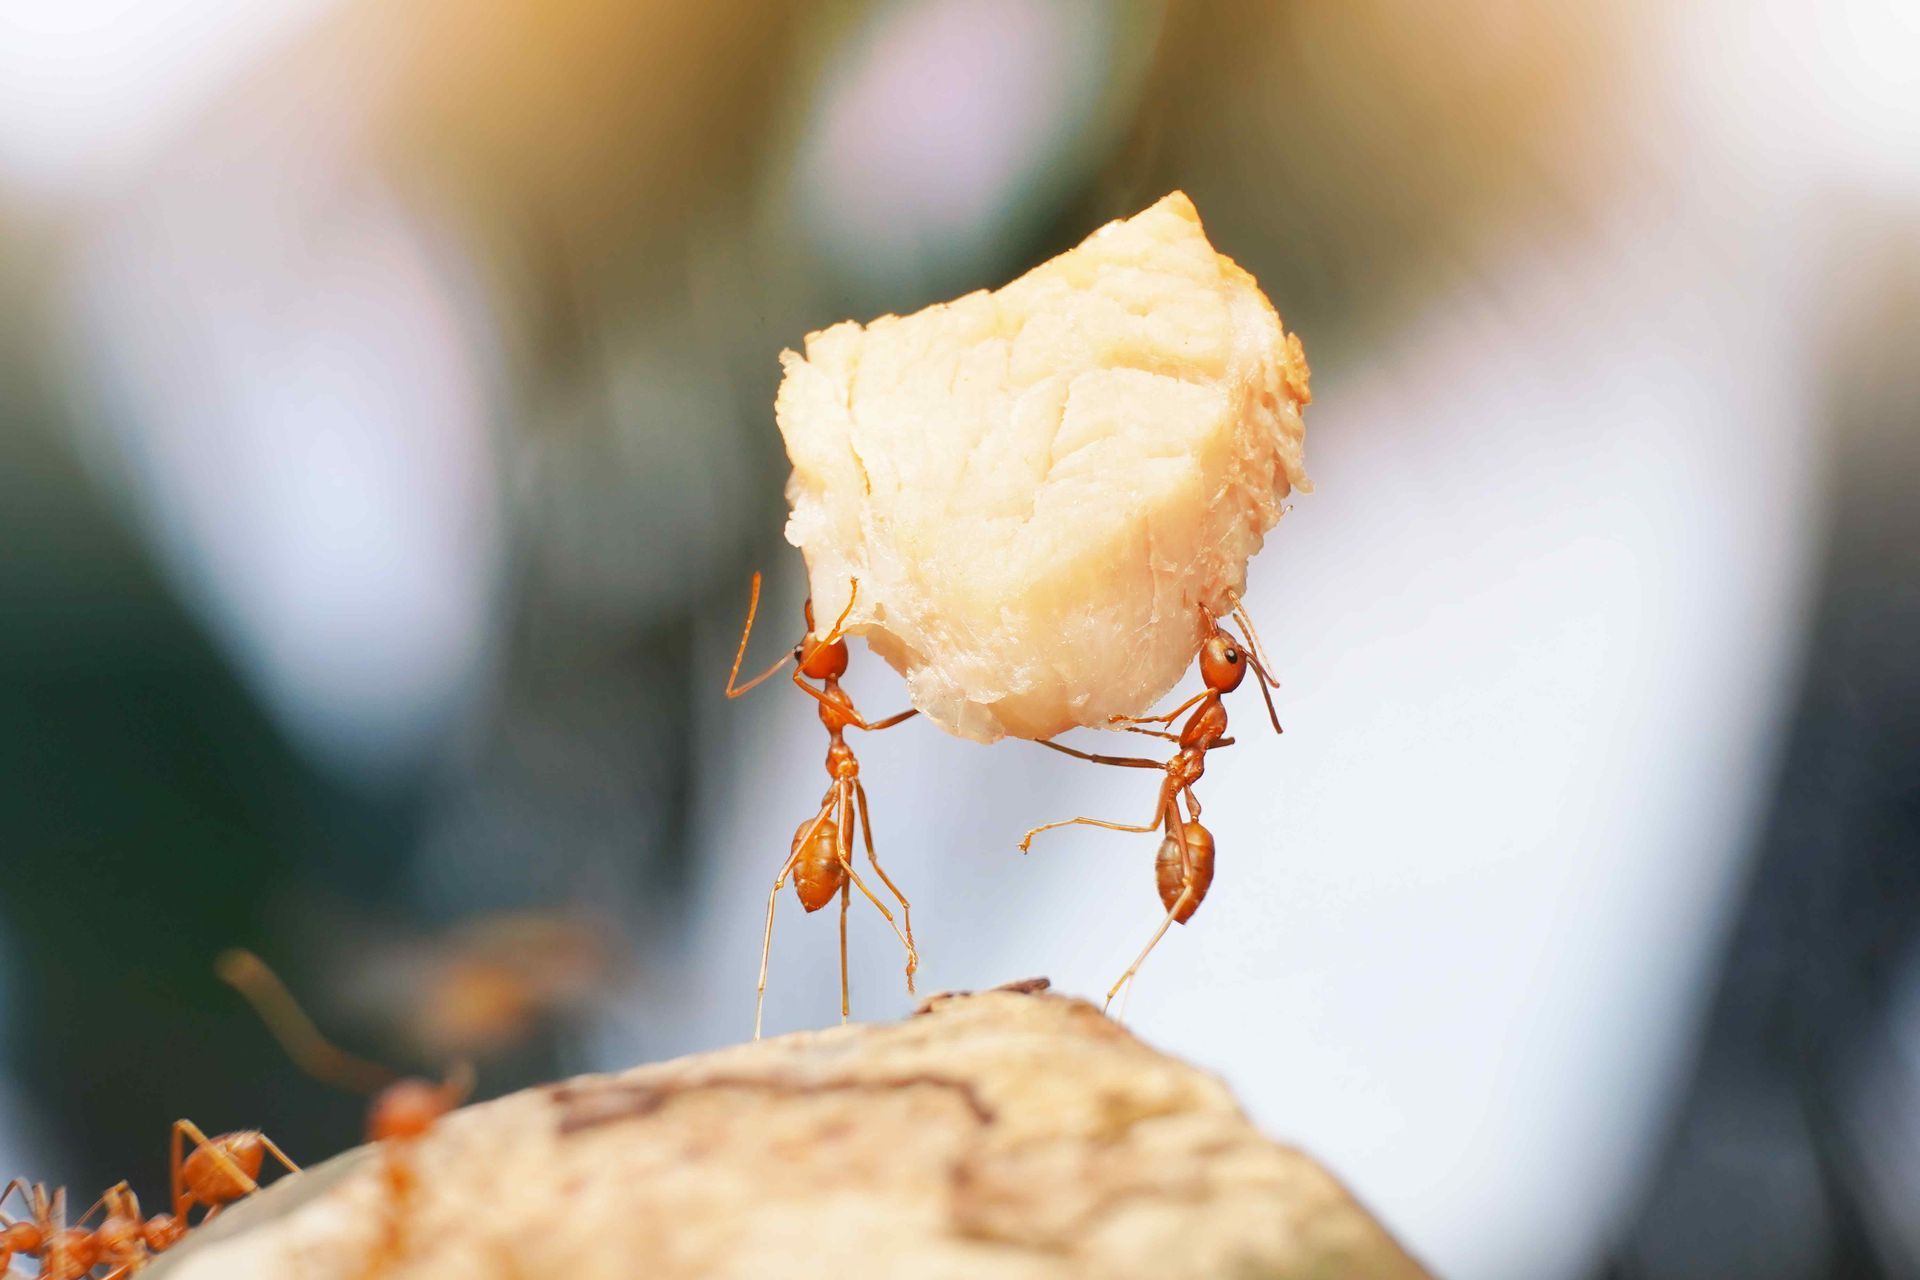 2 ants holding up a crumb